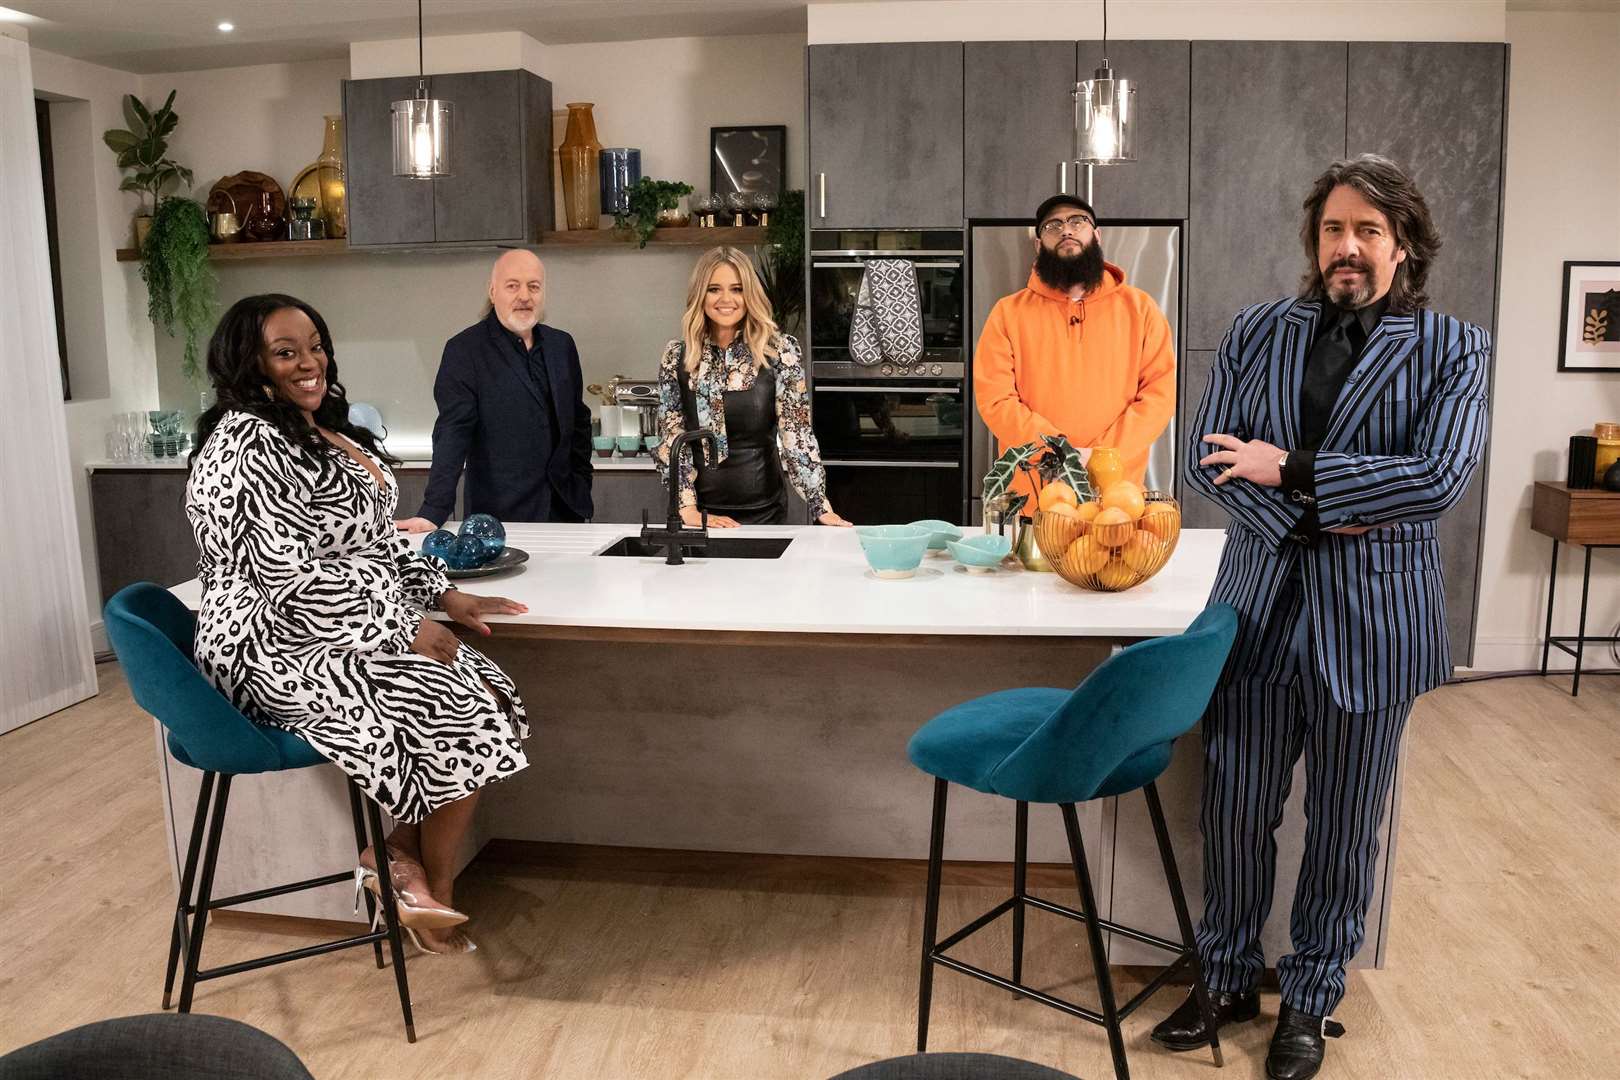 The celebrity panel was Judi Love, Bill Bailey, Emily Atack, Jamali Maddix, Laurence Llewelyn-Bowen. Copyright: BBC/Expectation Entertainment. Photographer: Nic Serpell-Rand